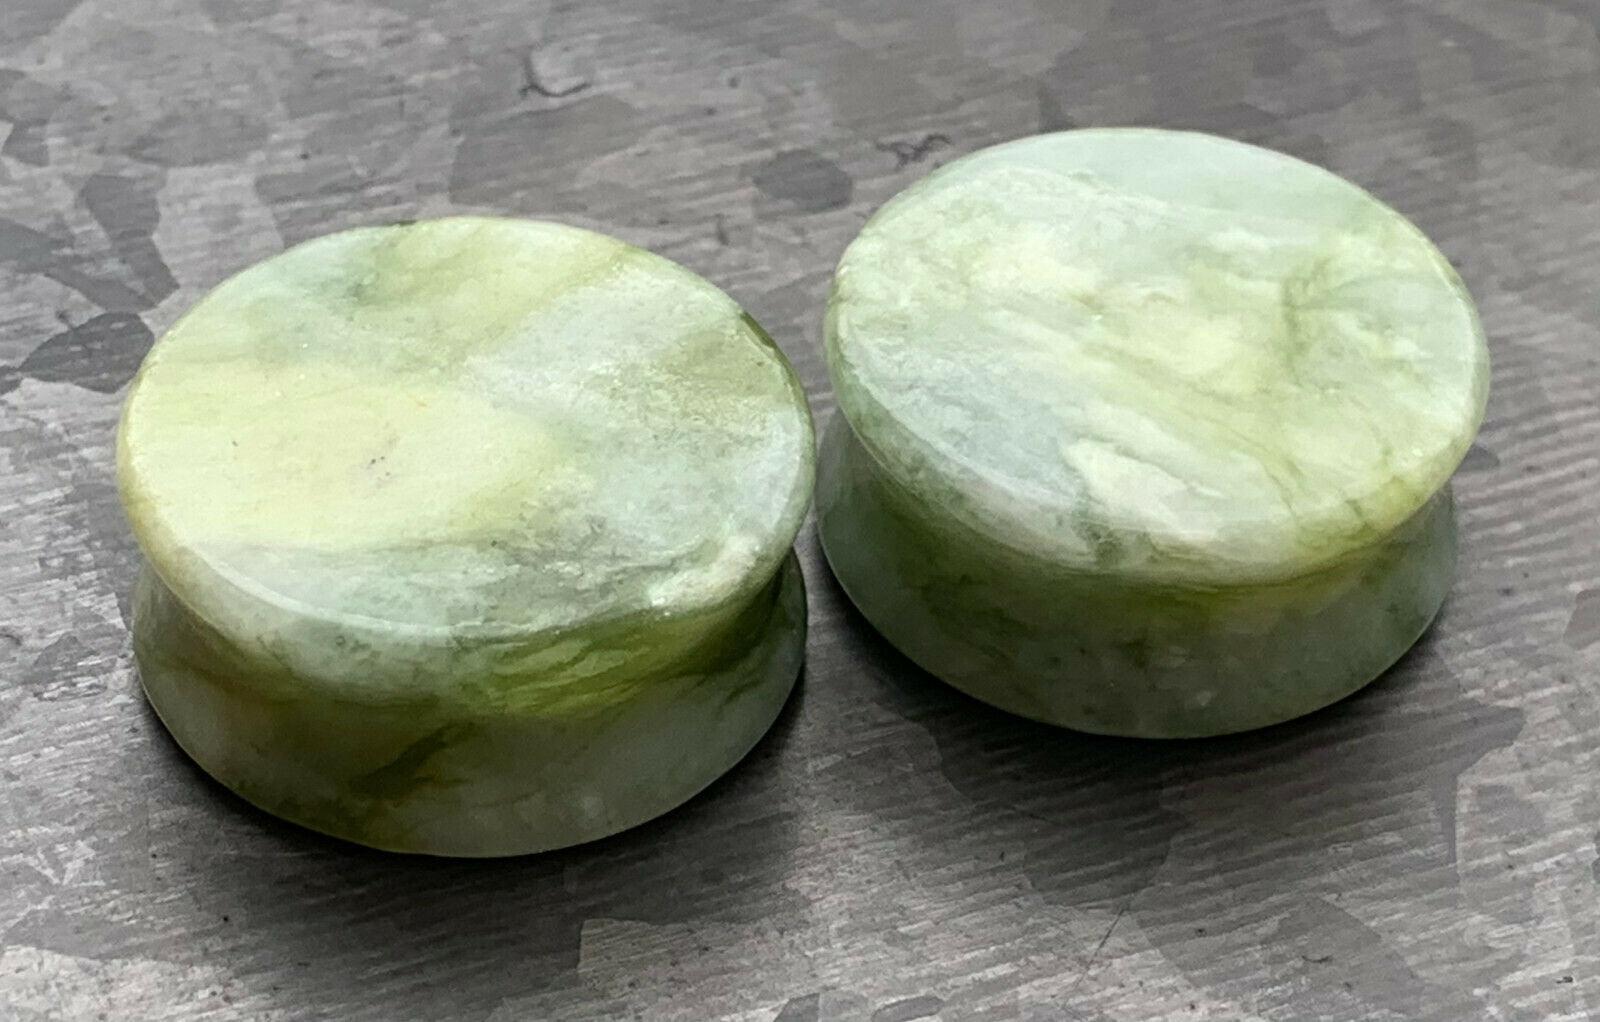 PAIR of Unique Natural South Jade Organic Stone Plugs - Gauges 4g (5mm) up to 1" (25mm) available!